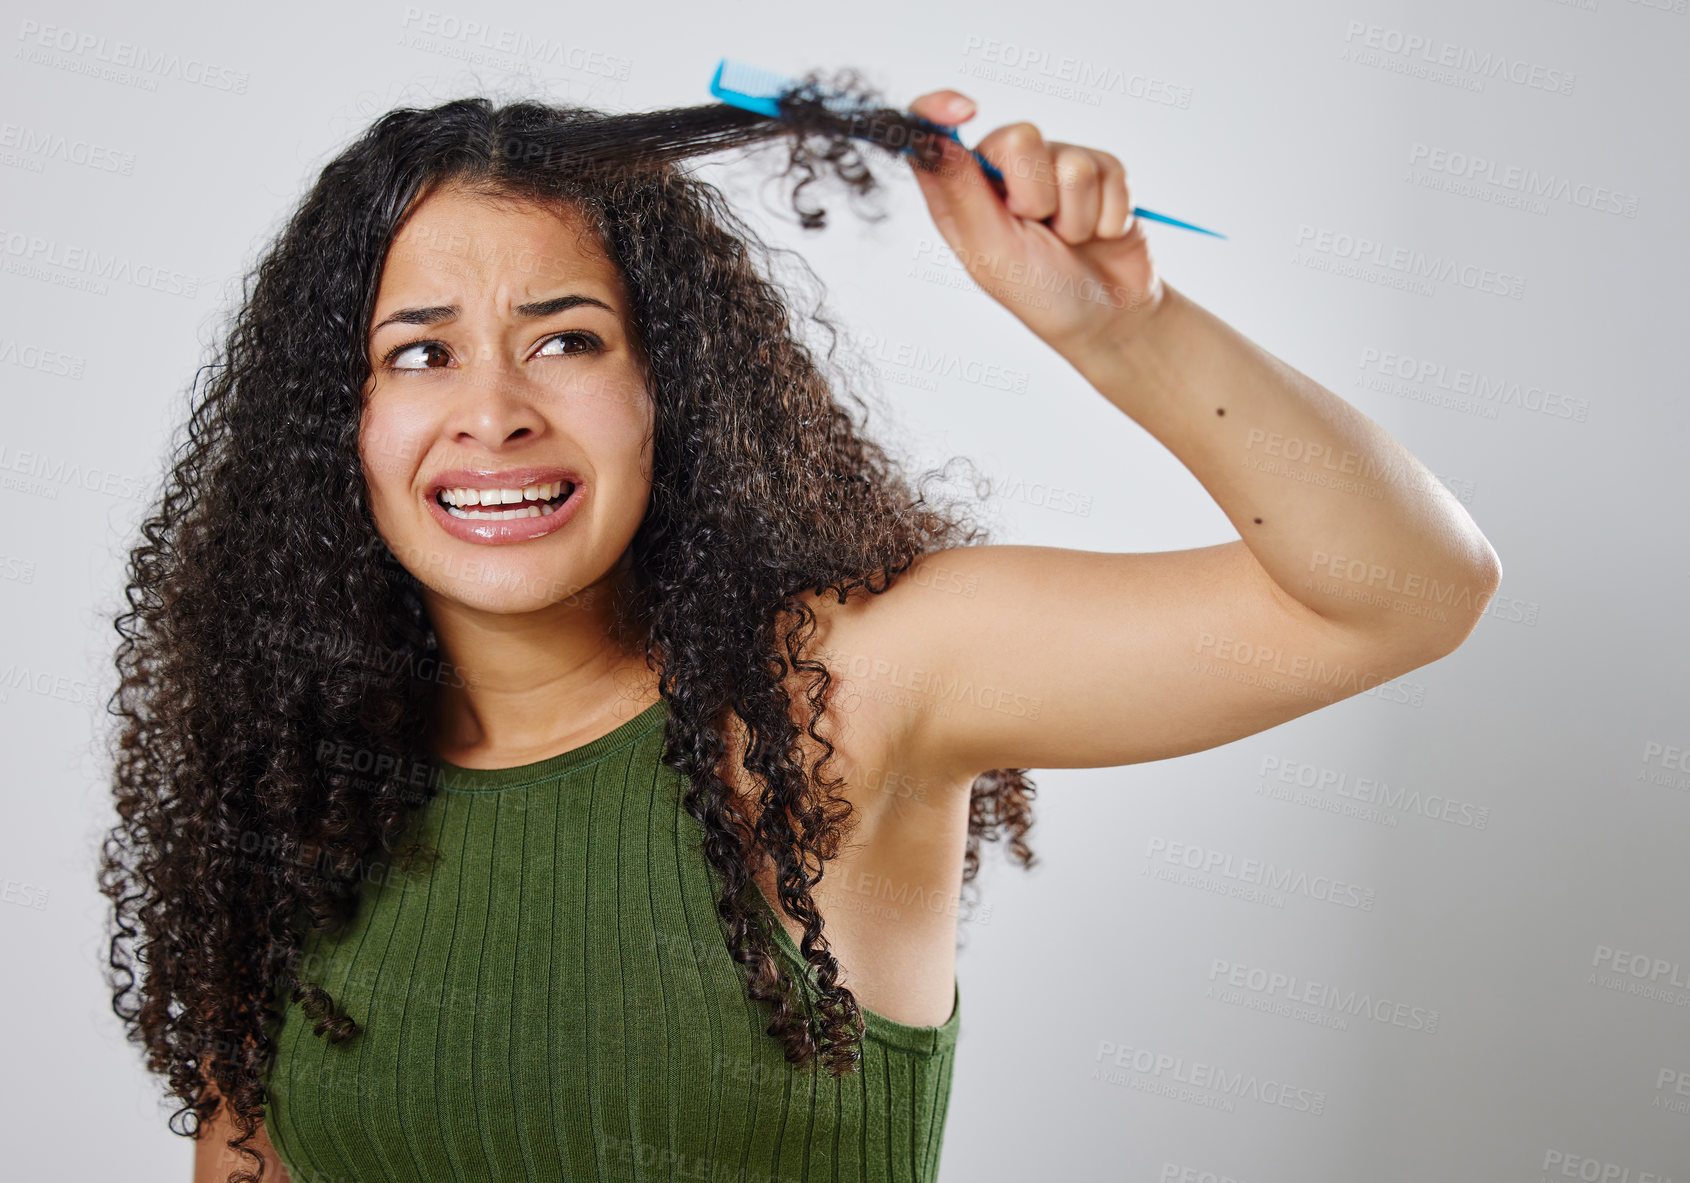 Buy stock photo Shot of a woman frowning while combing her hair against a grey background